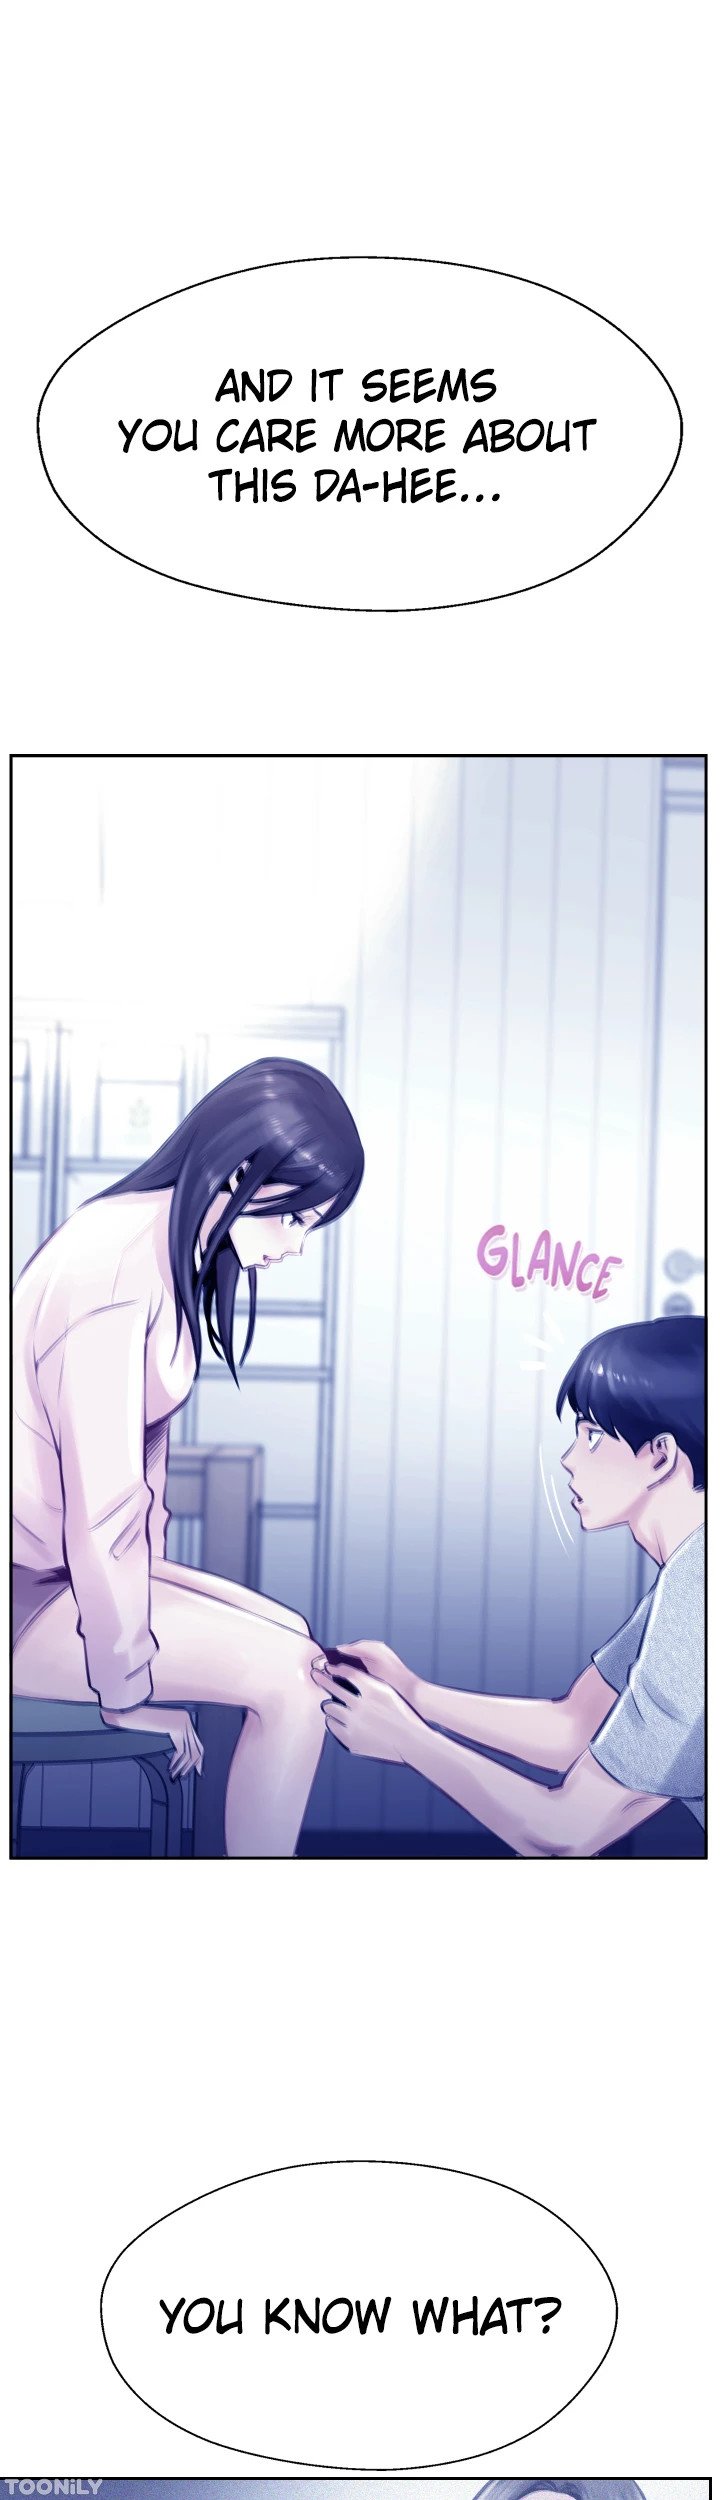 top-of-the-world-chap-34-32